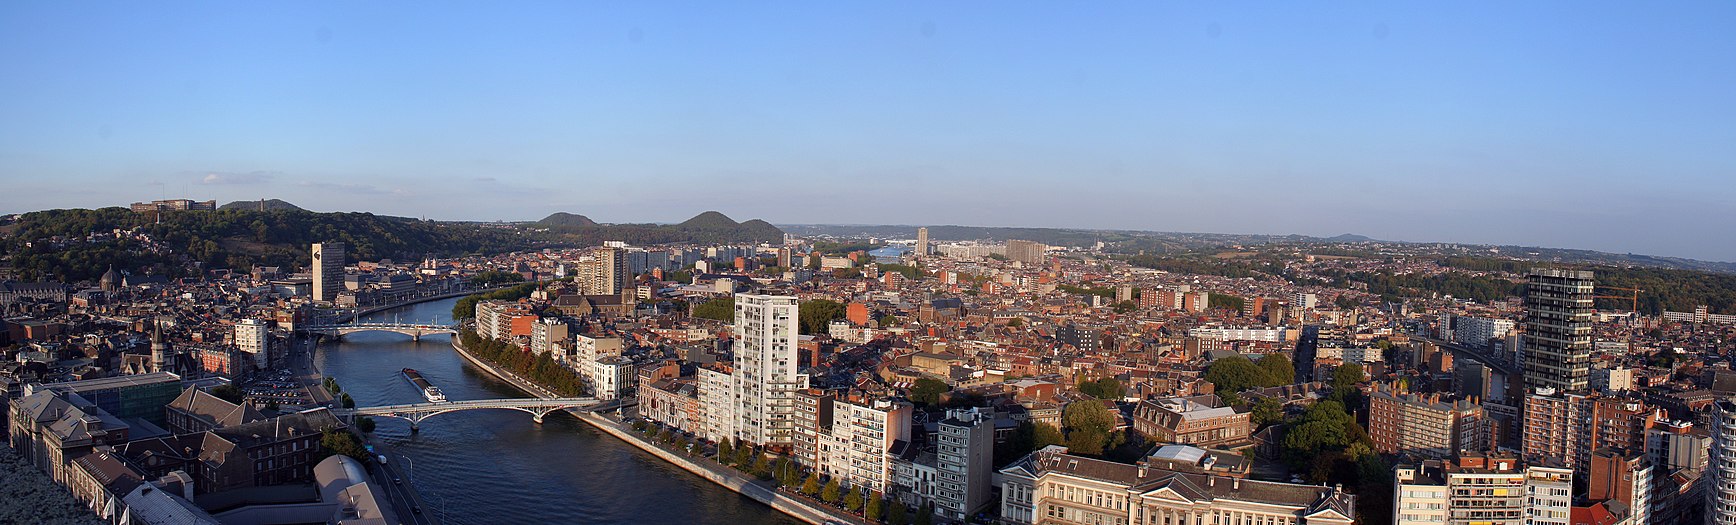 View of Liège from the roof of an apartment house